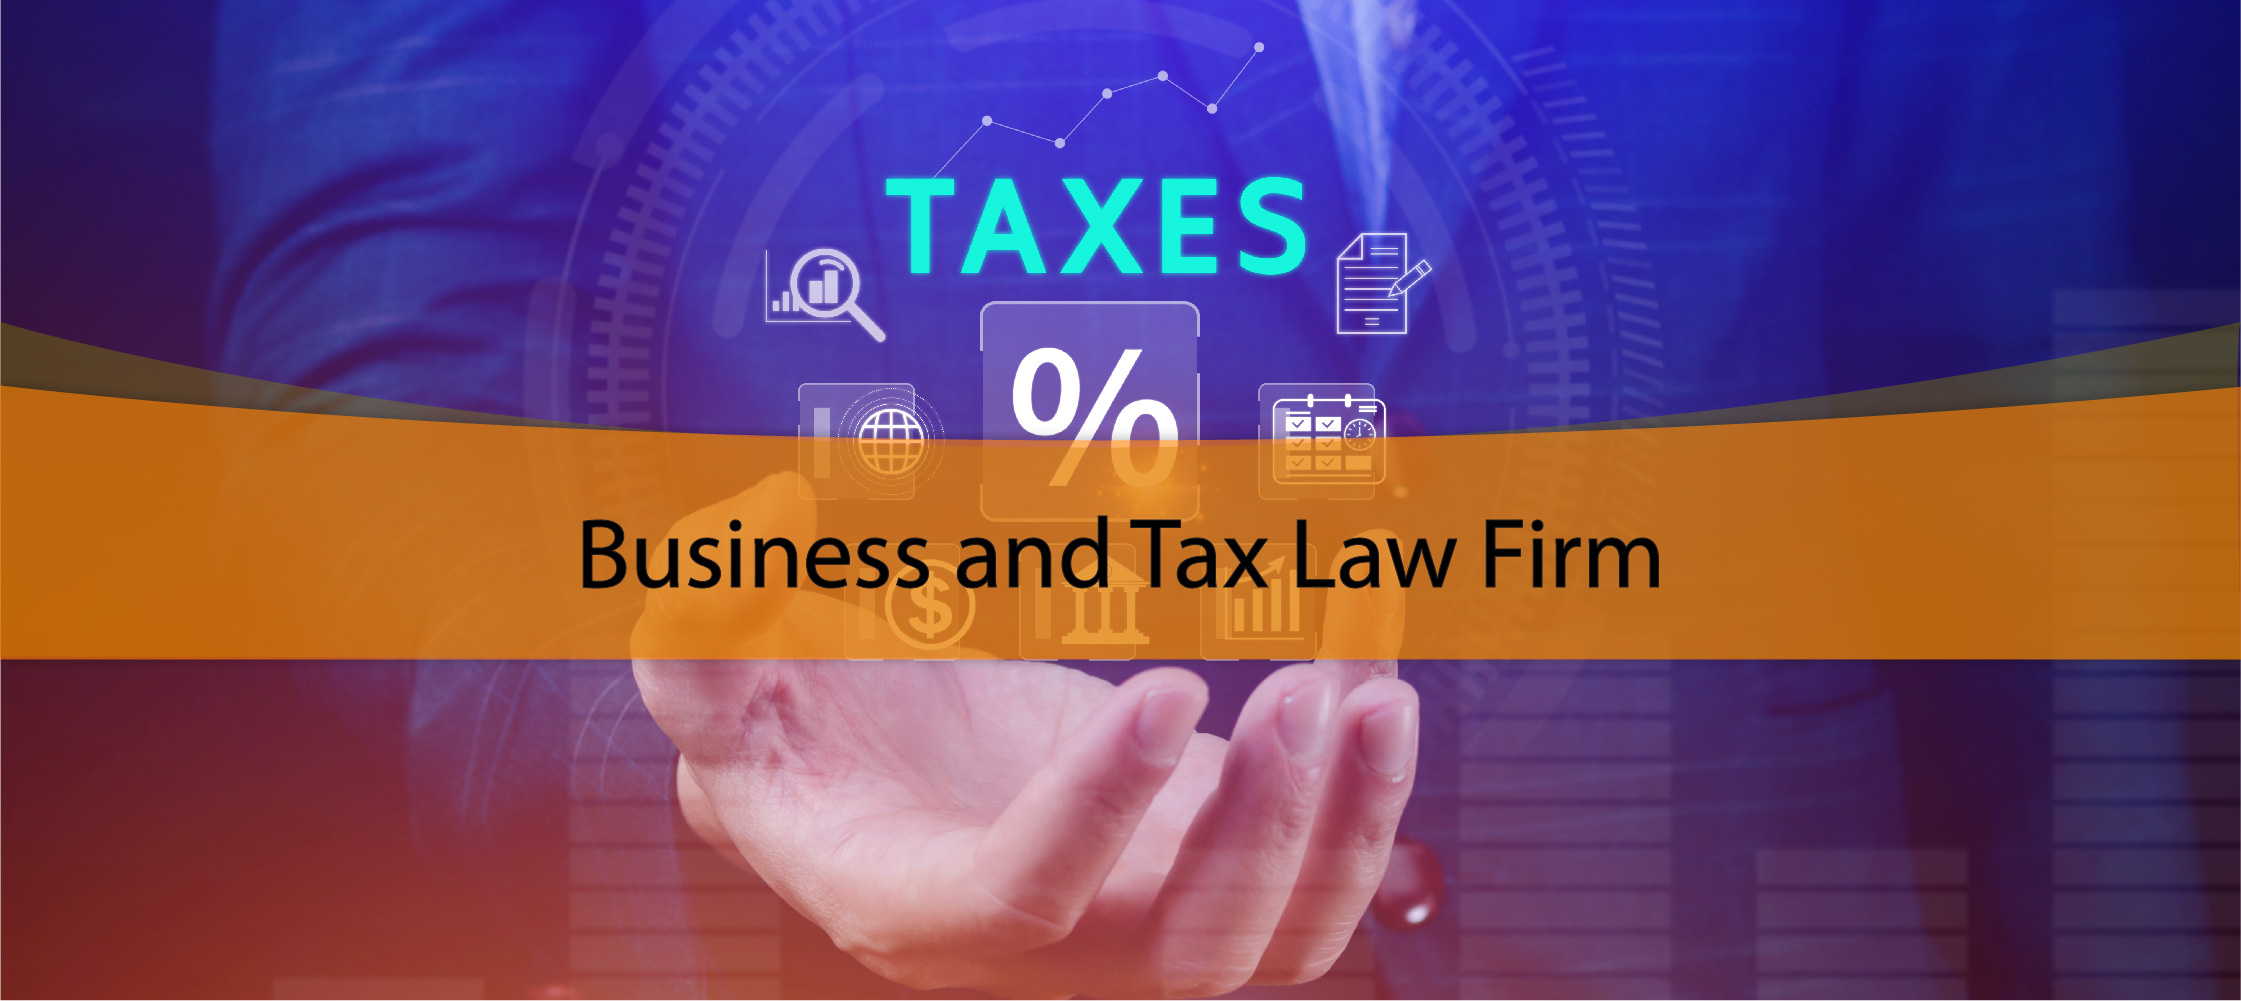 Business and Tax Law Firms